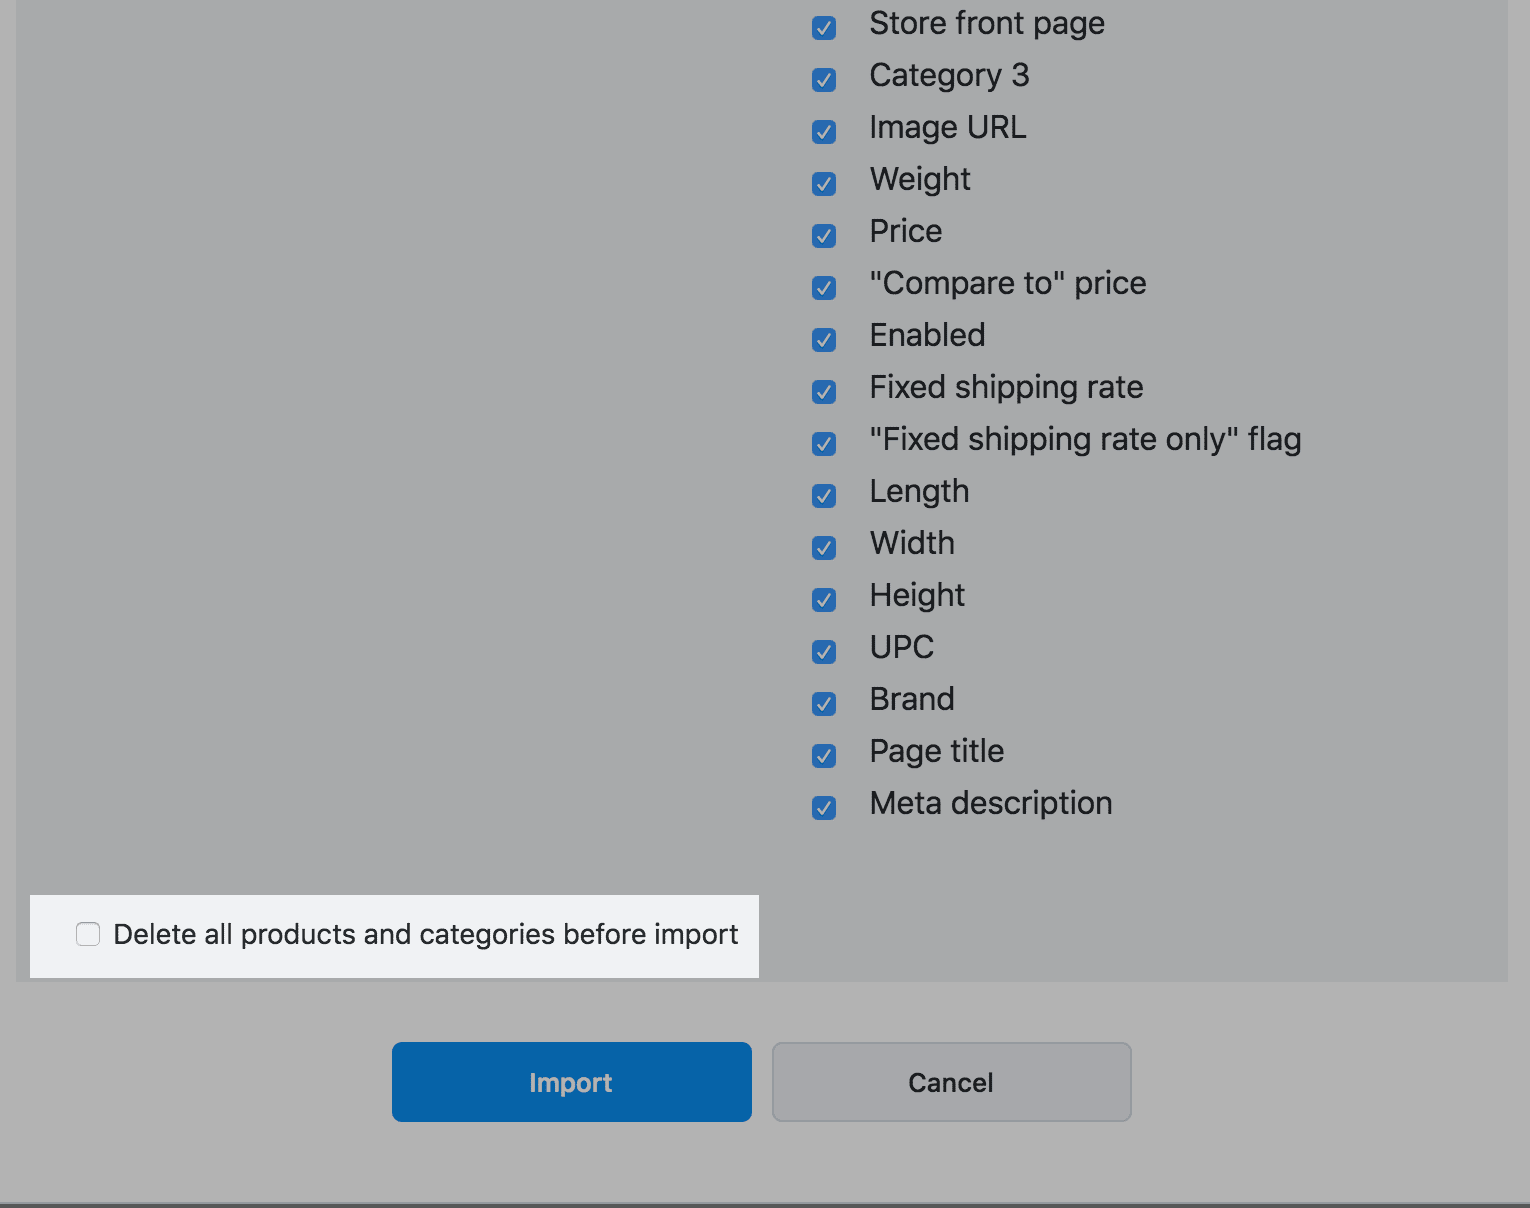 option Delete all products and categories before import